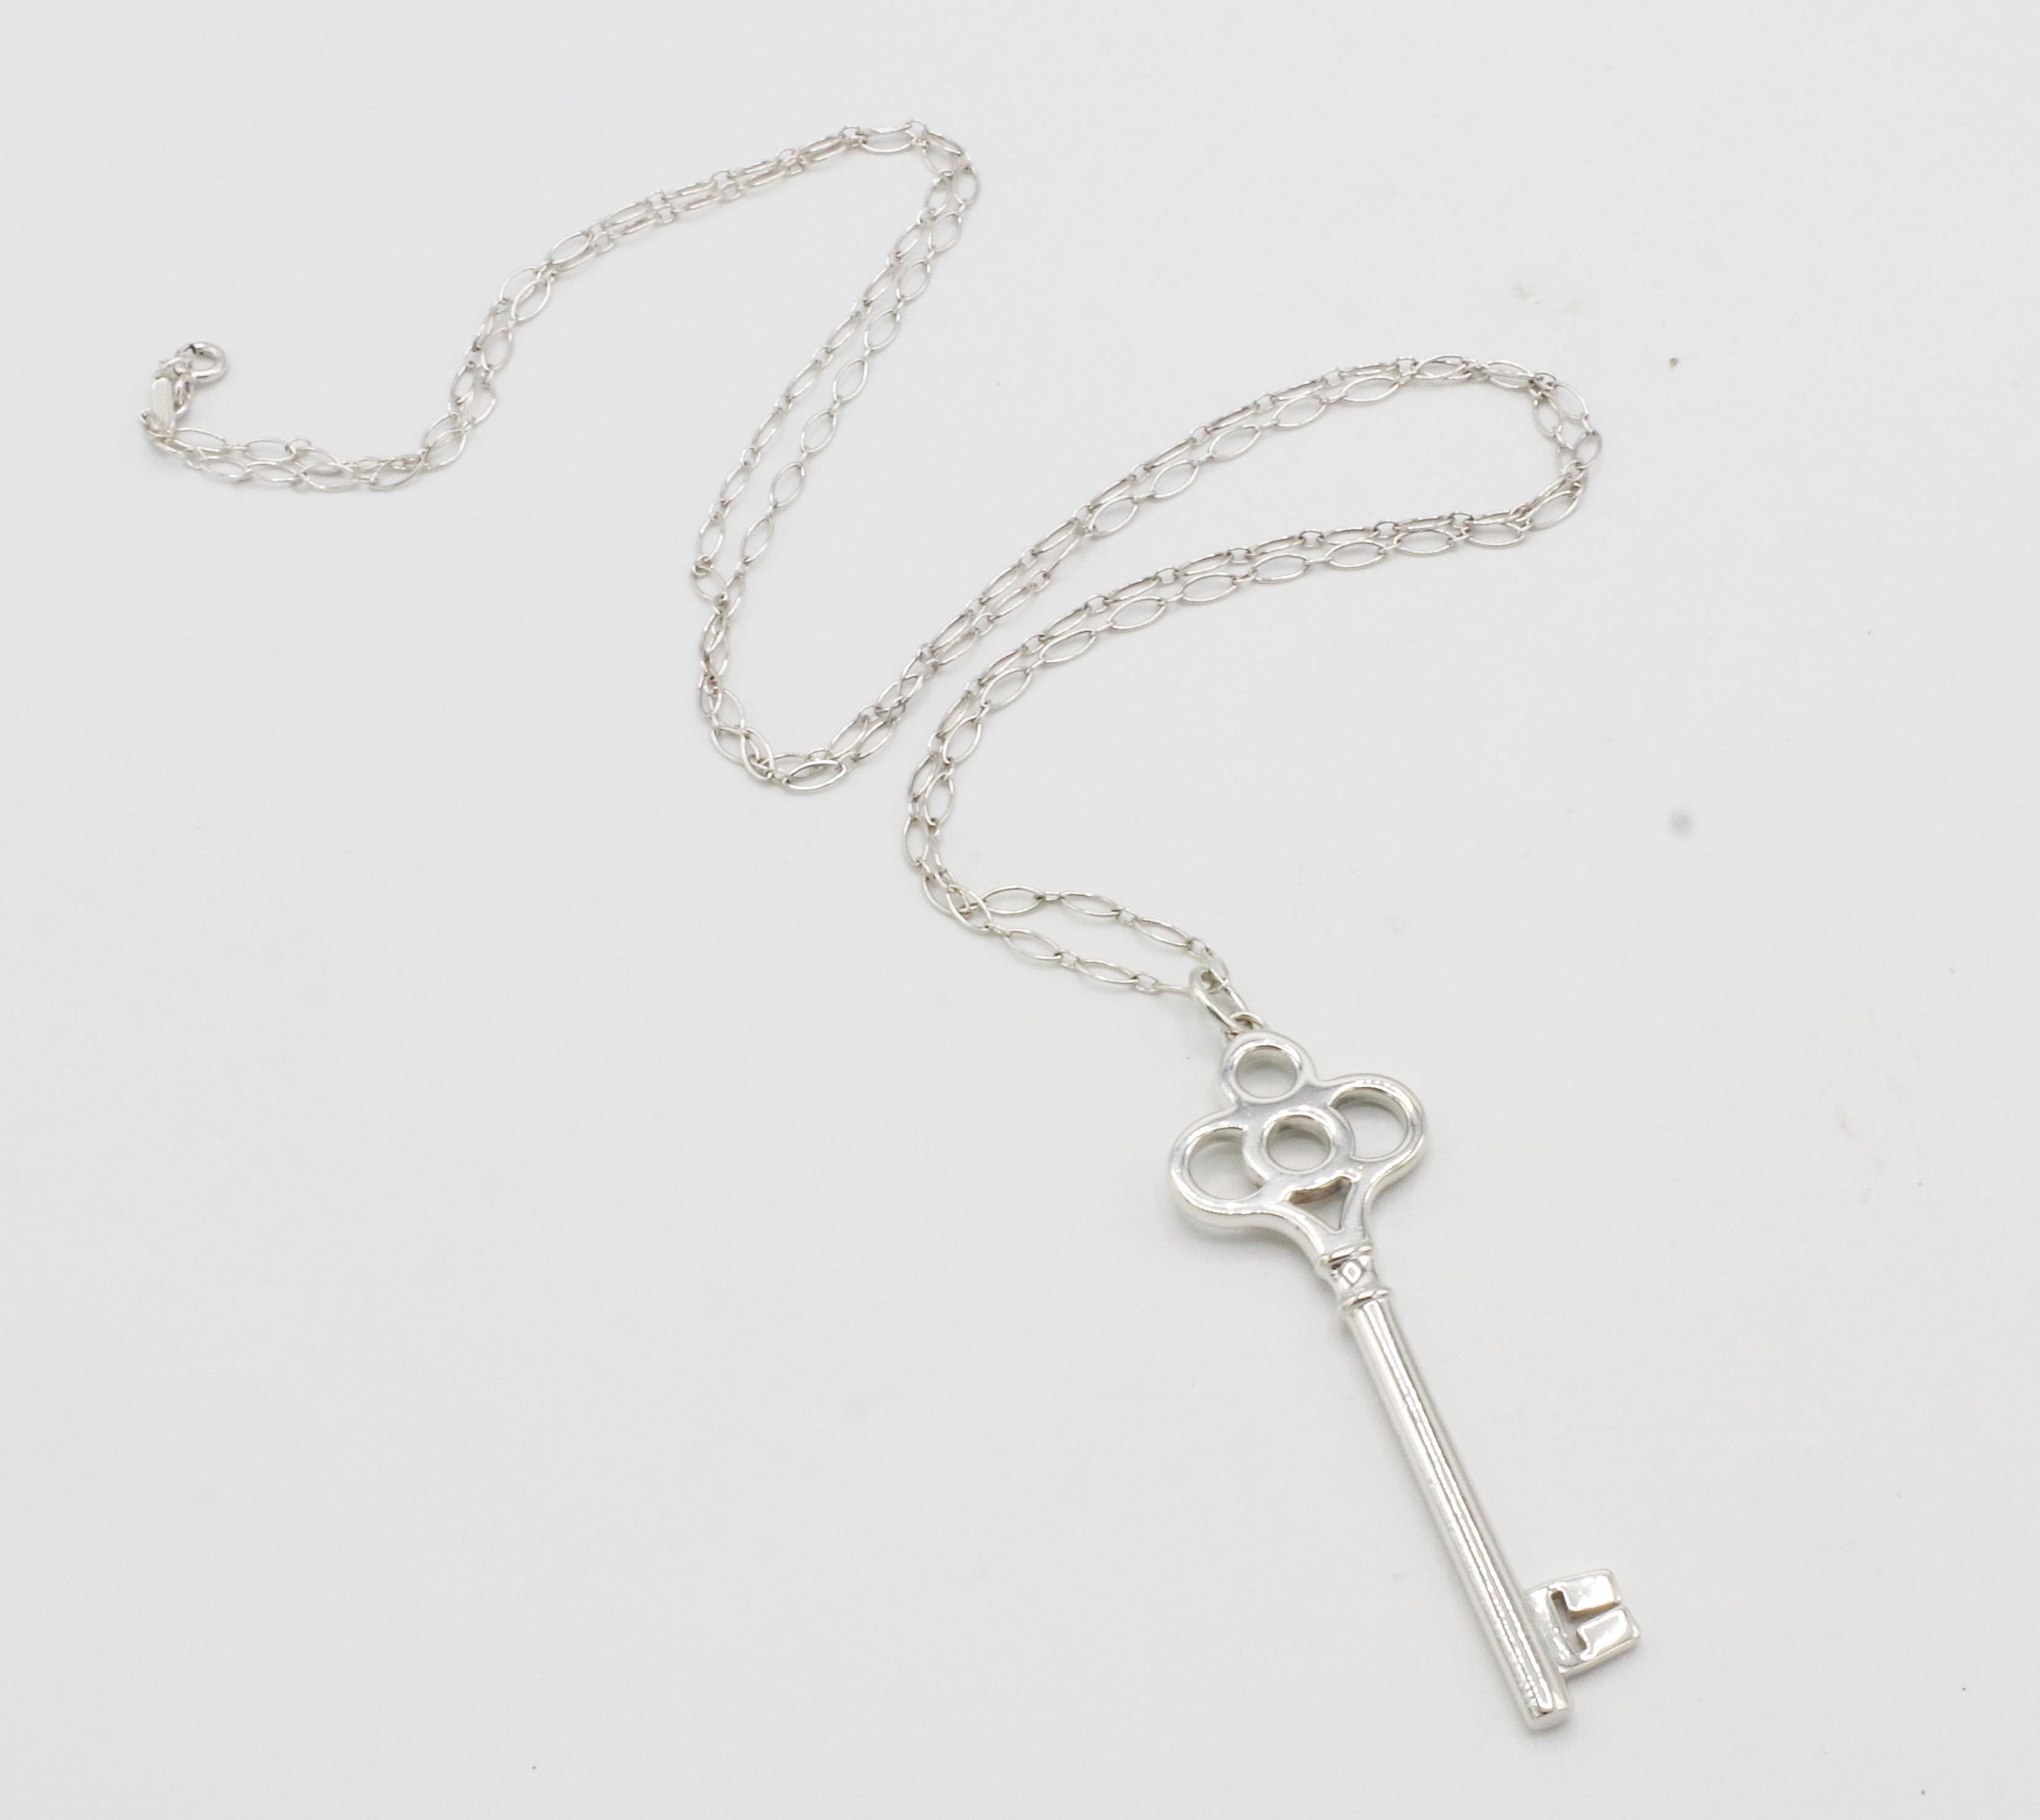 Modern Tiffany & Co. Sterling Silver Crown Key Pendant Long Chain Necklace